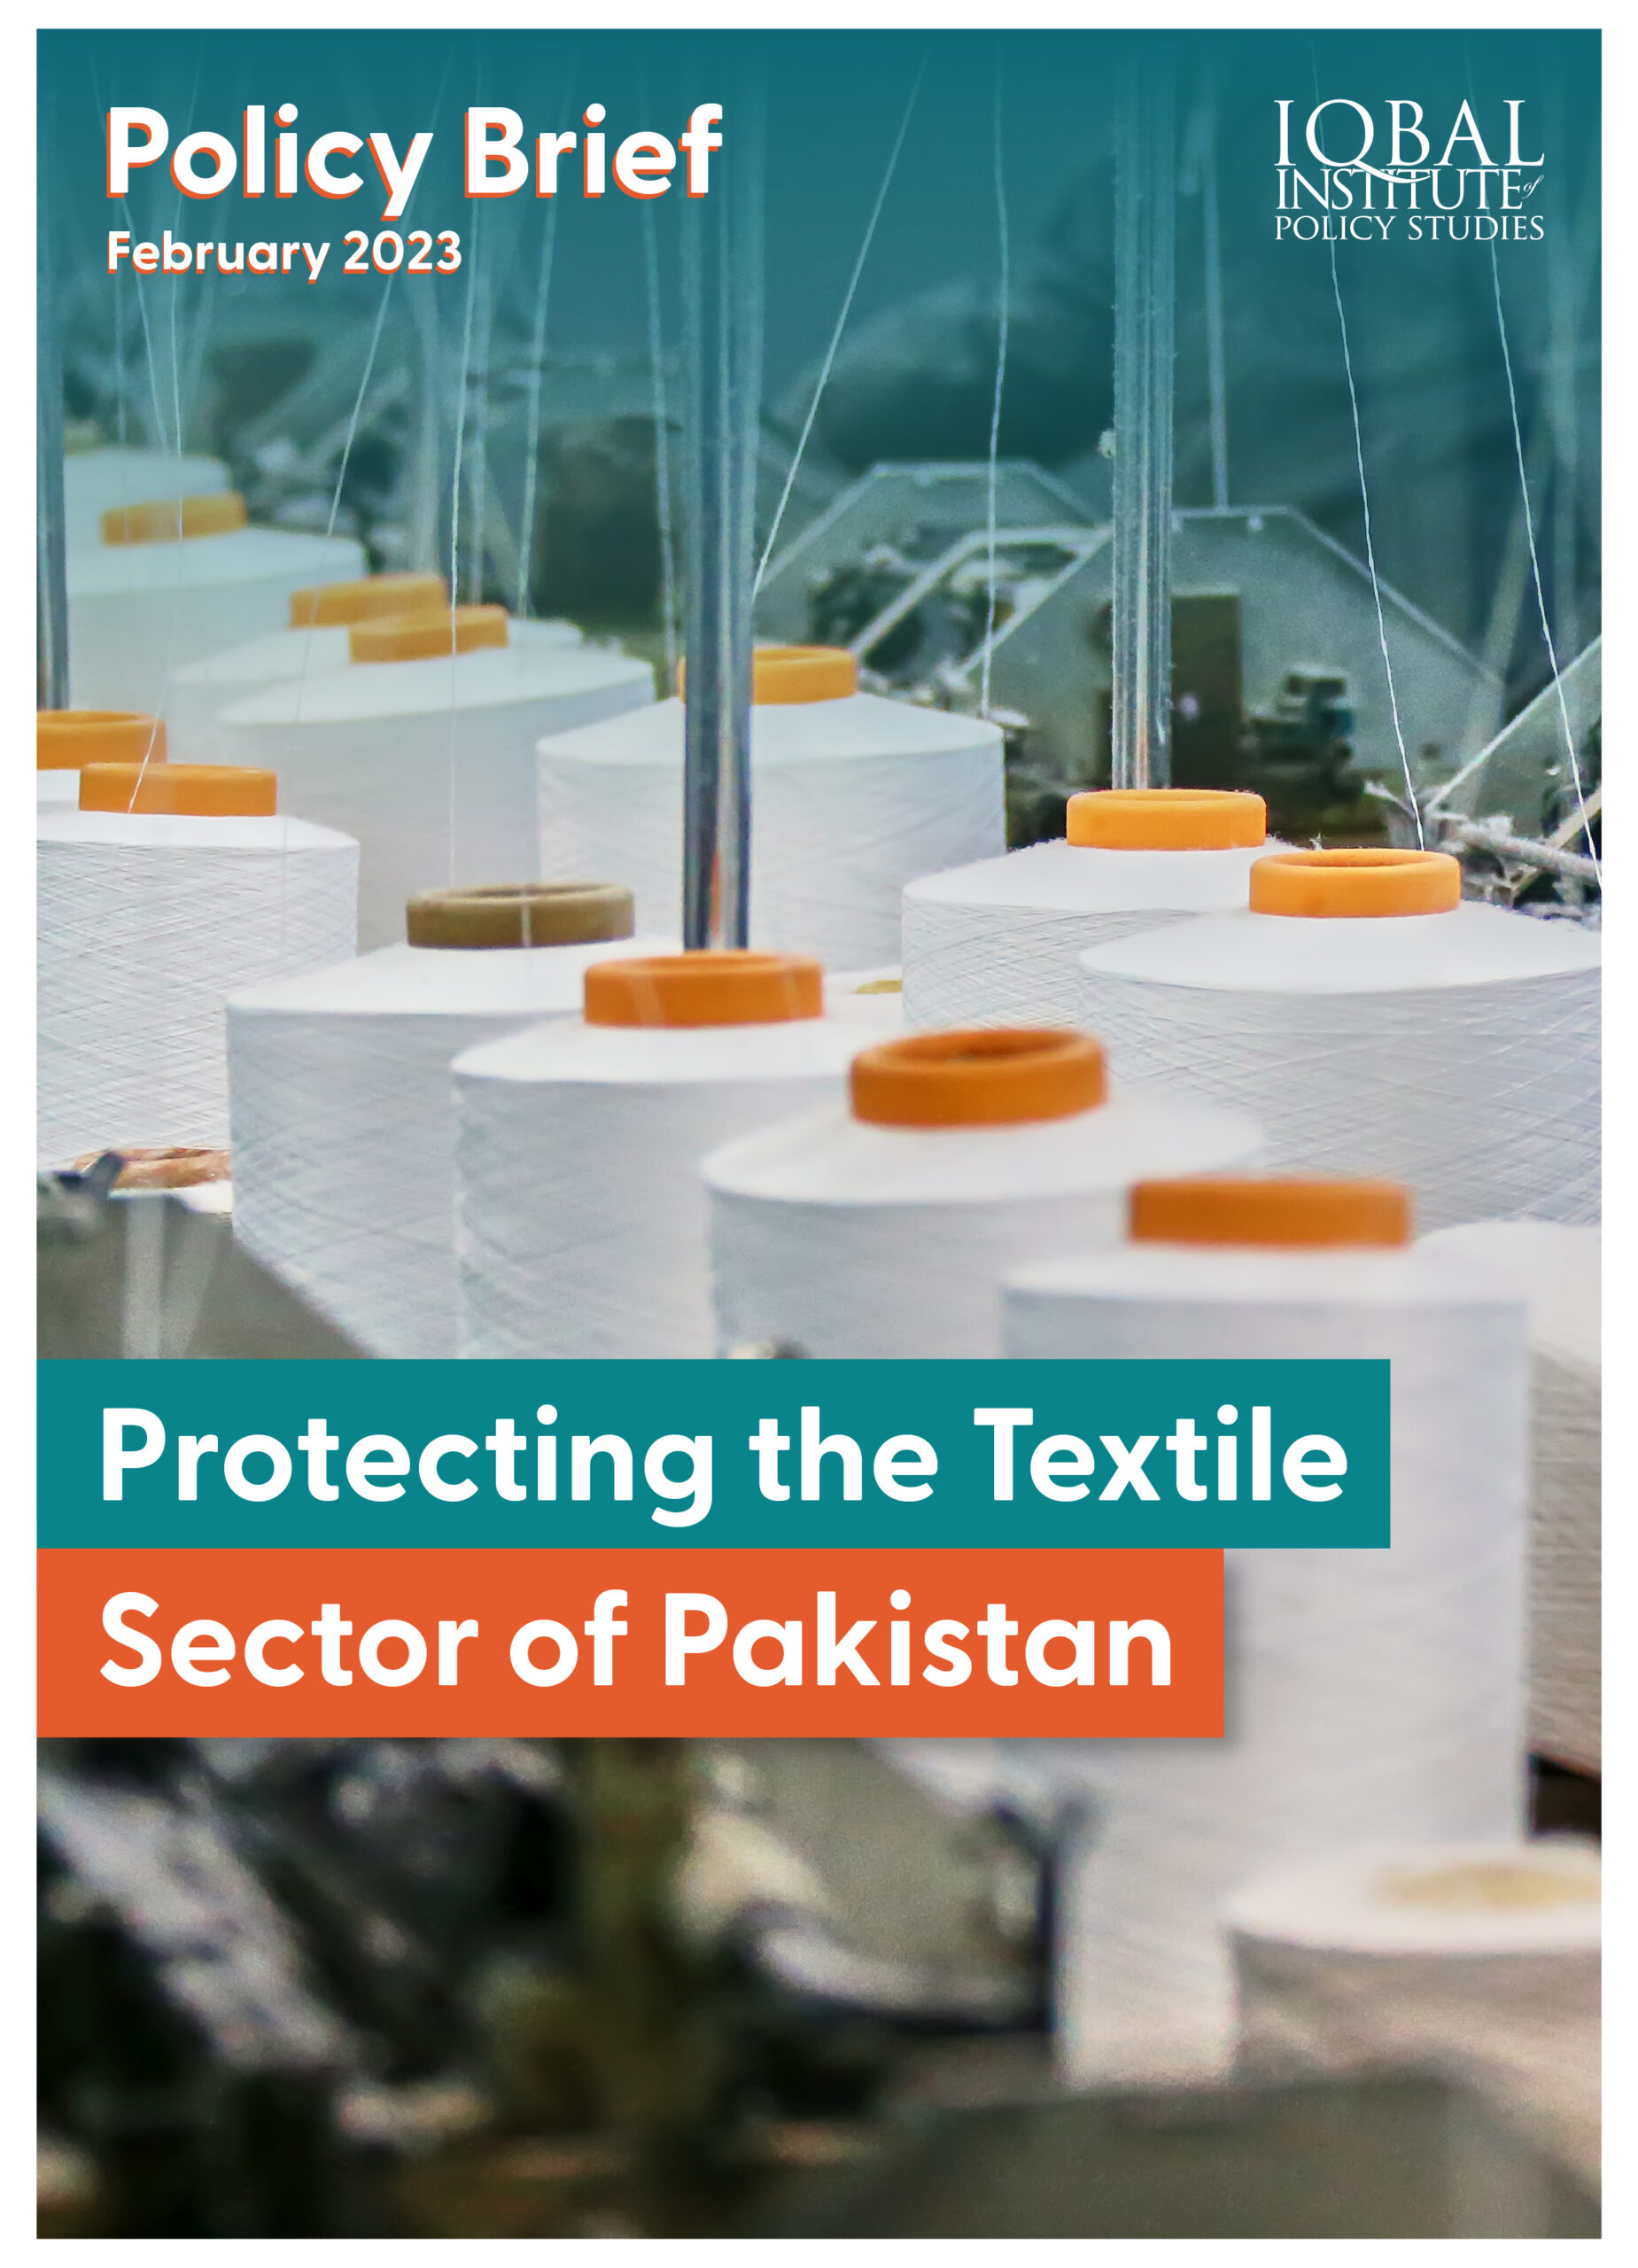 Protecting the Textile Sector of Pakistan